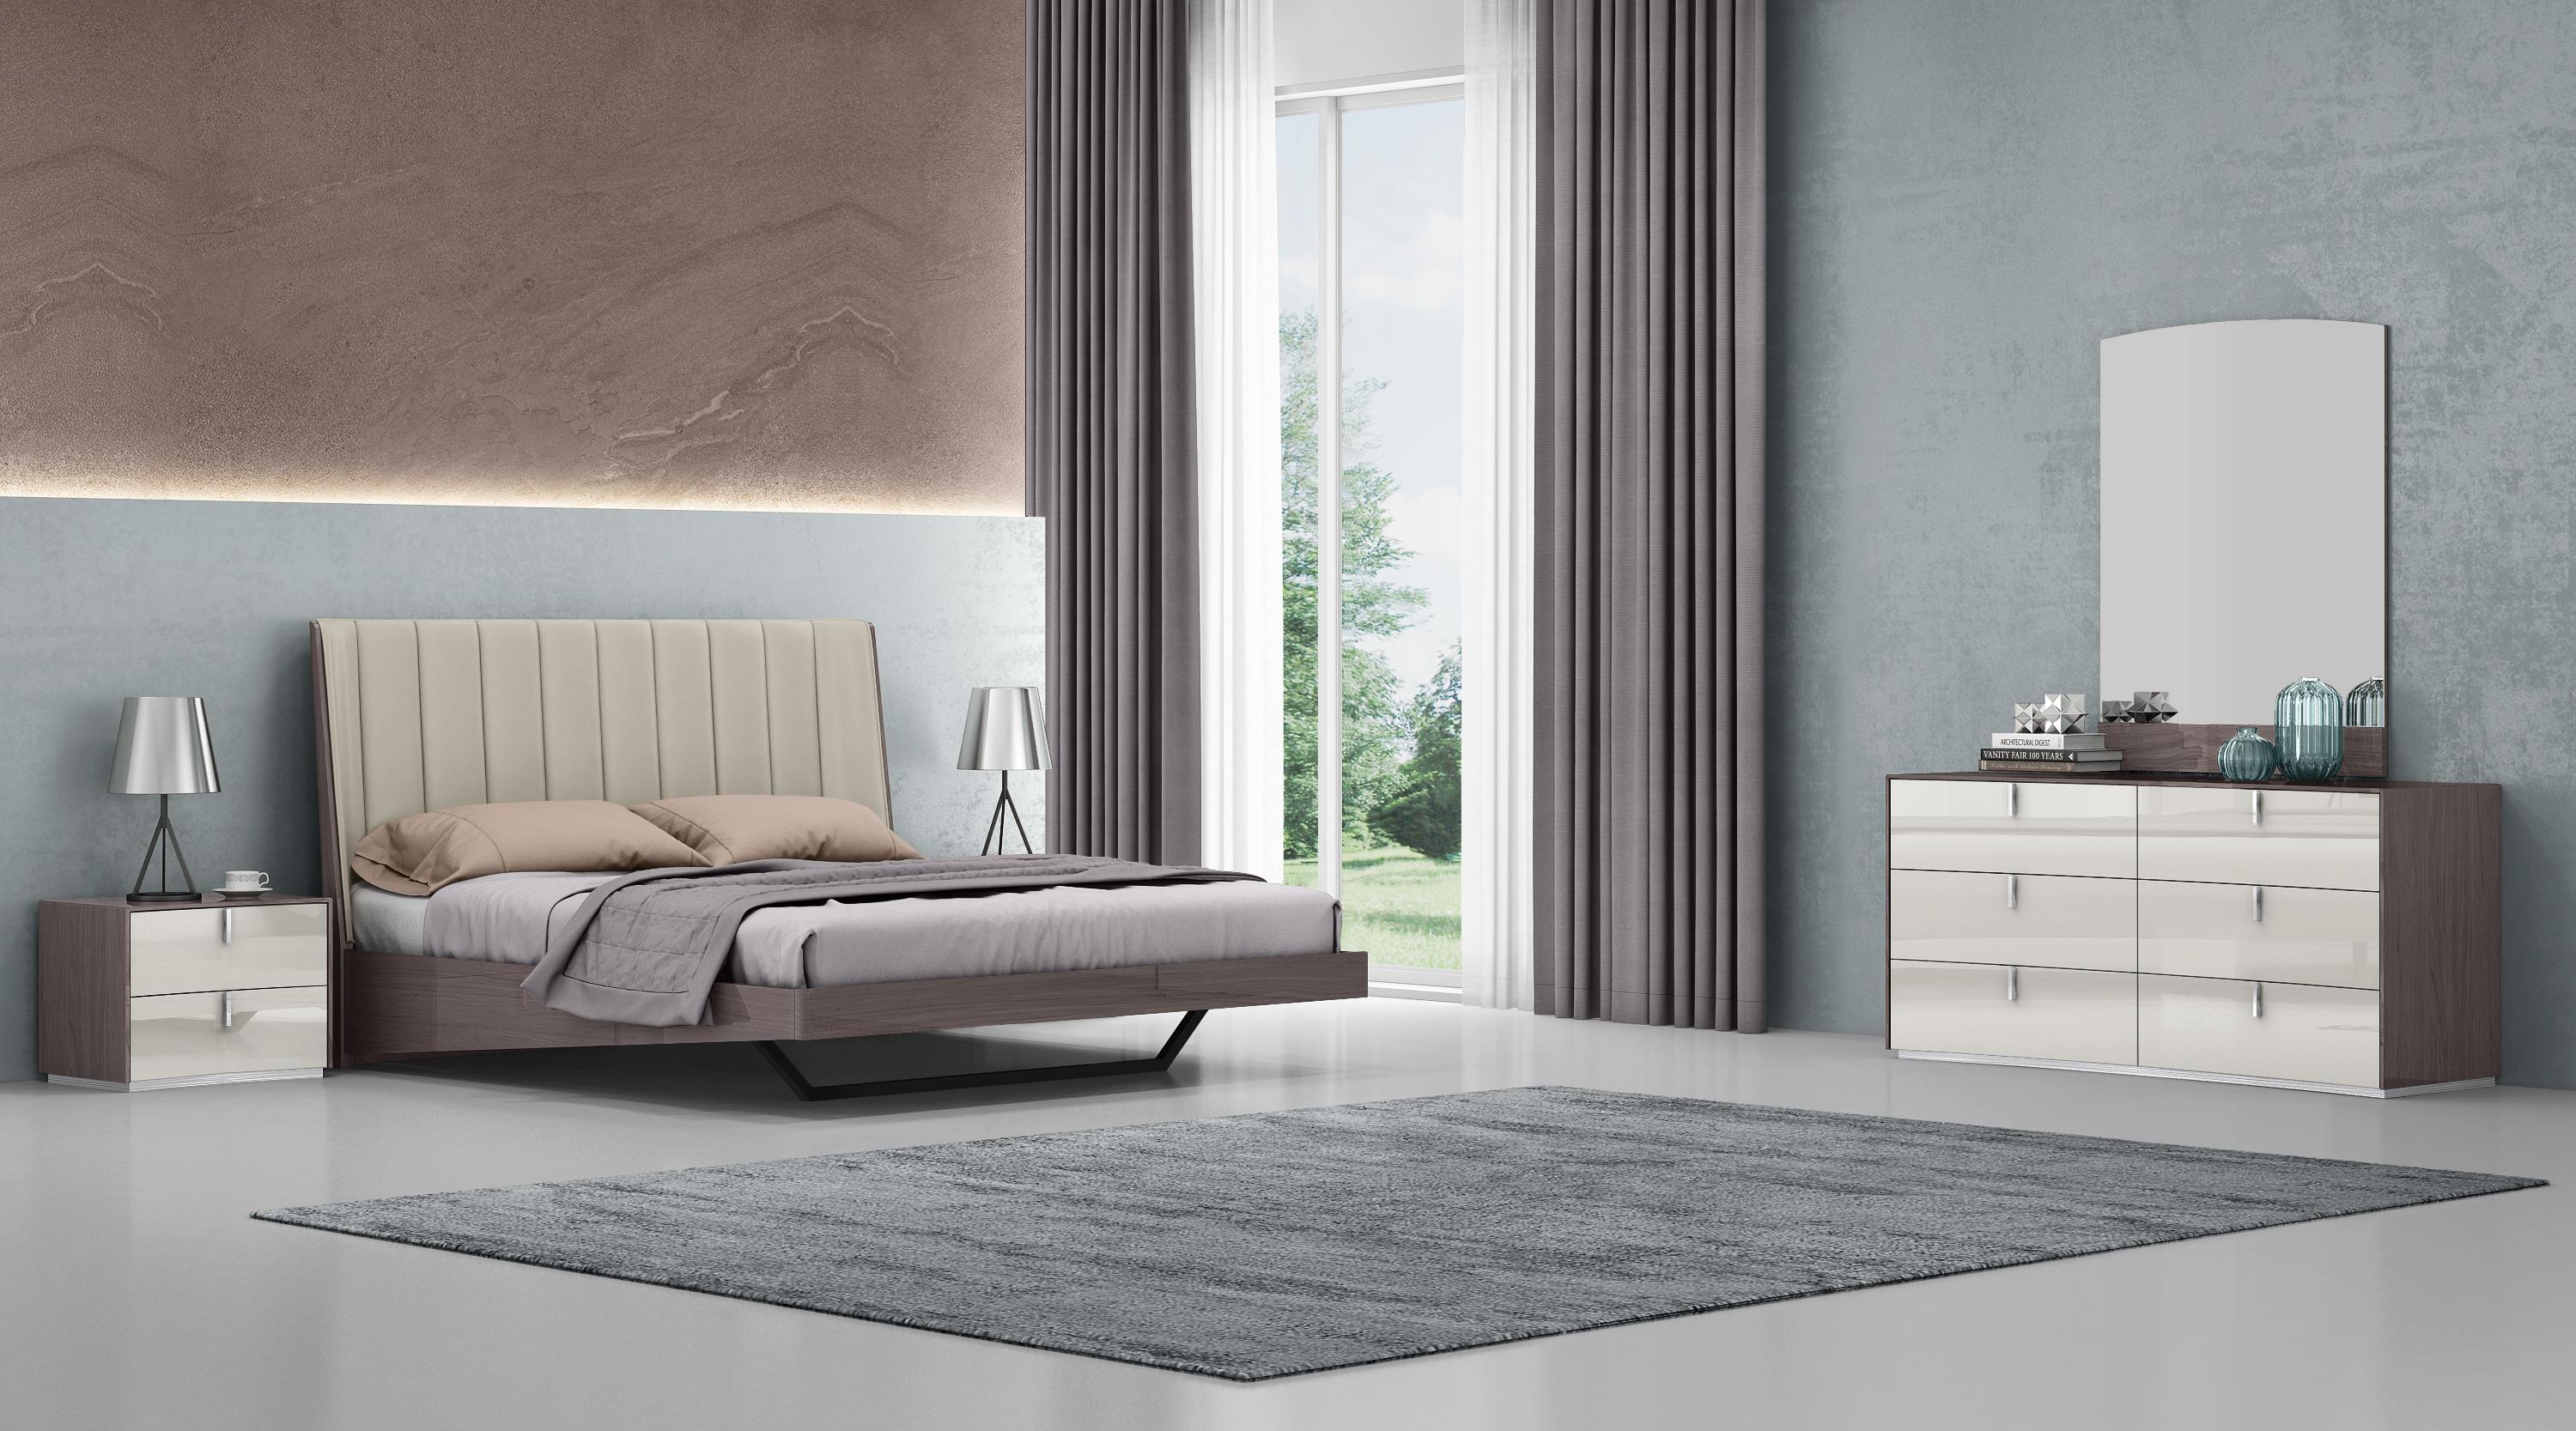 Contemporary Bedroom Set BQ1754-GRY/LGRY-3PC Berlin BQ1754-GRY/LGRY-3PC in Light Gray Faux Leather